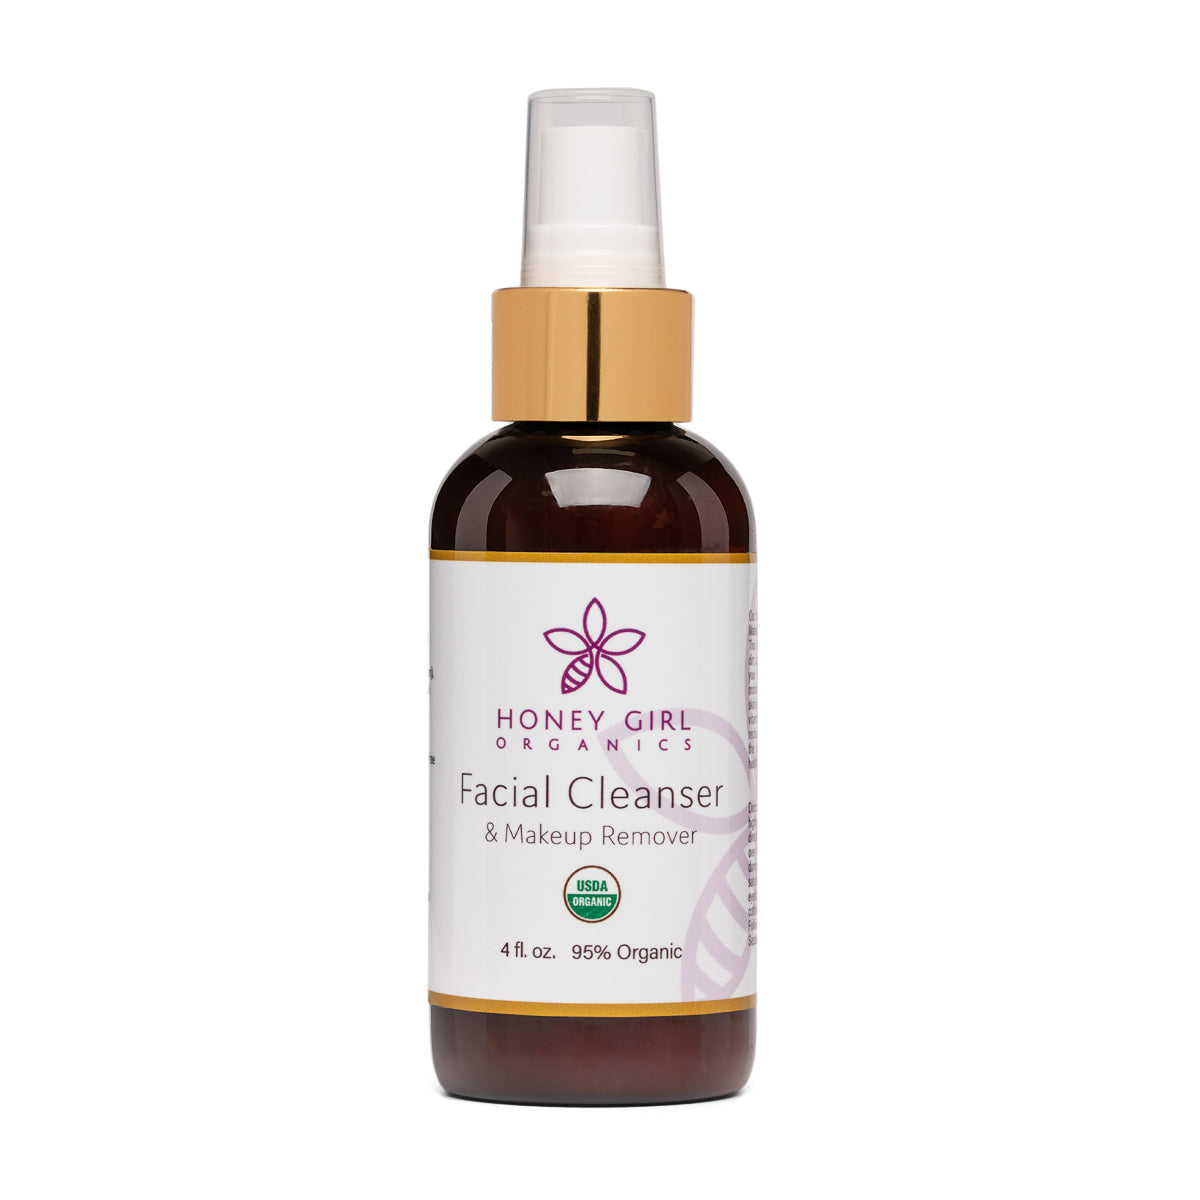 Facial Cleanser &amp; Make Up Remover | Honey Girl Organics | Raw Living UK | Skin Care | Beauty | Honey Girl Organic Face &amp; Eye Cream (4oz): Cleanser &amp; Make-Up Remover is a cleansing/makeup removing cream made with the finest, all-natural products.